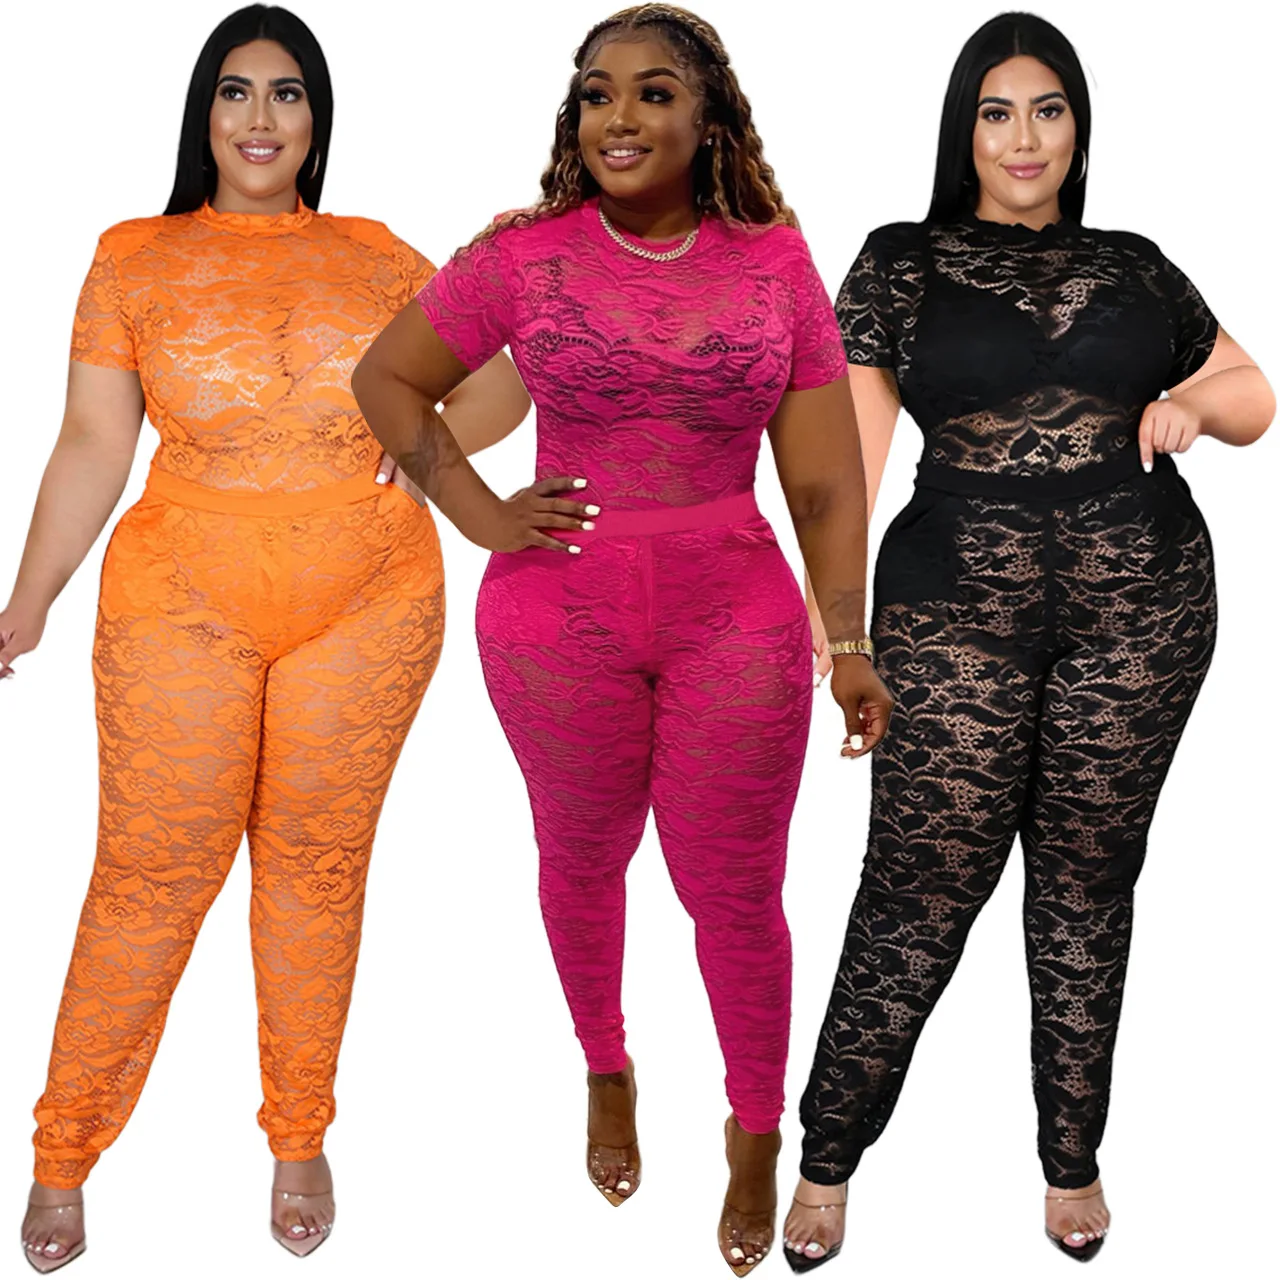 

2022 new arrivals summer plus size women's clothing see through nightclub outfit lace two piece pants set, Picture